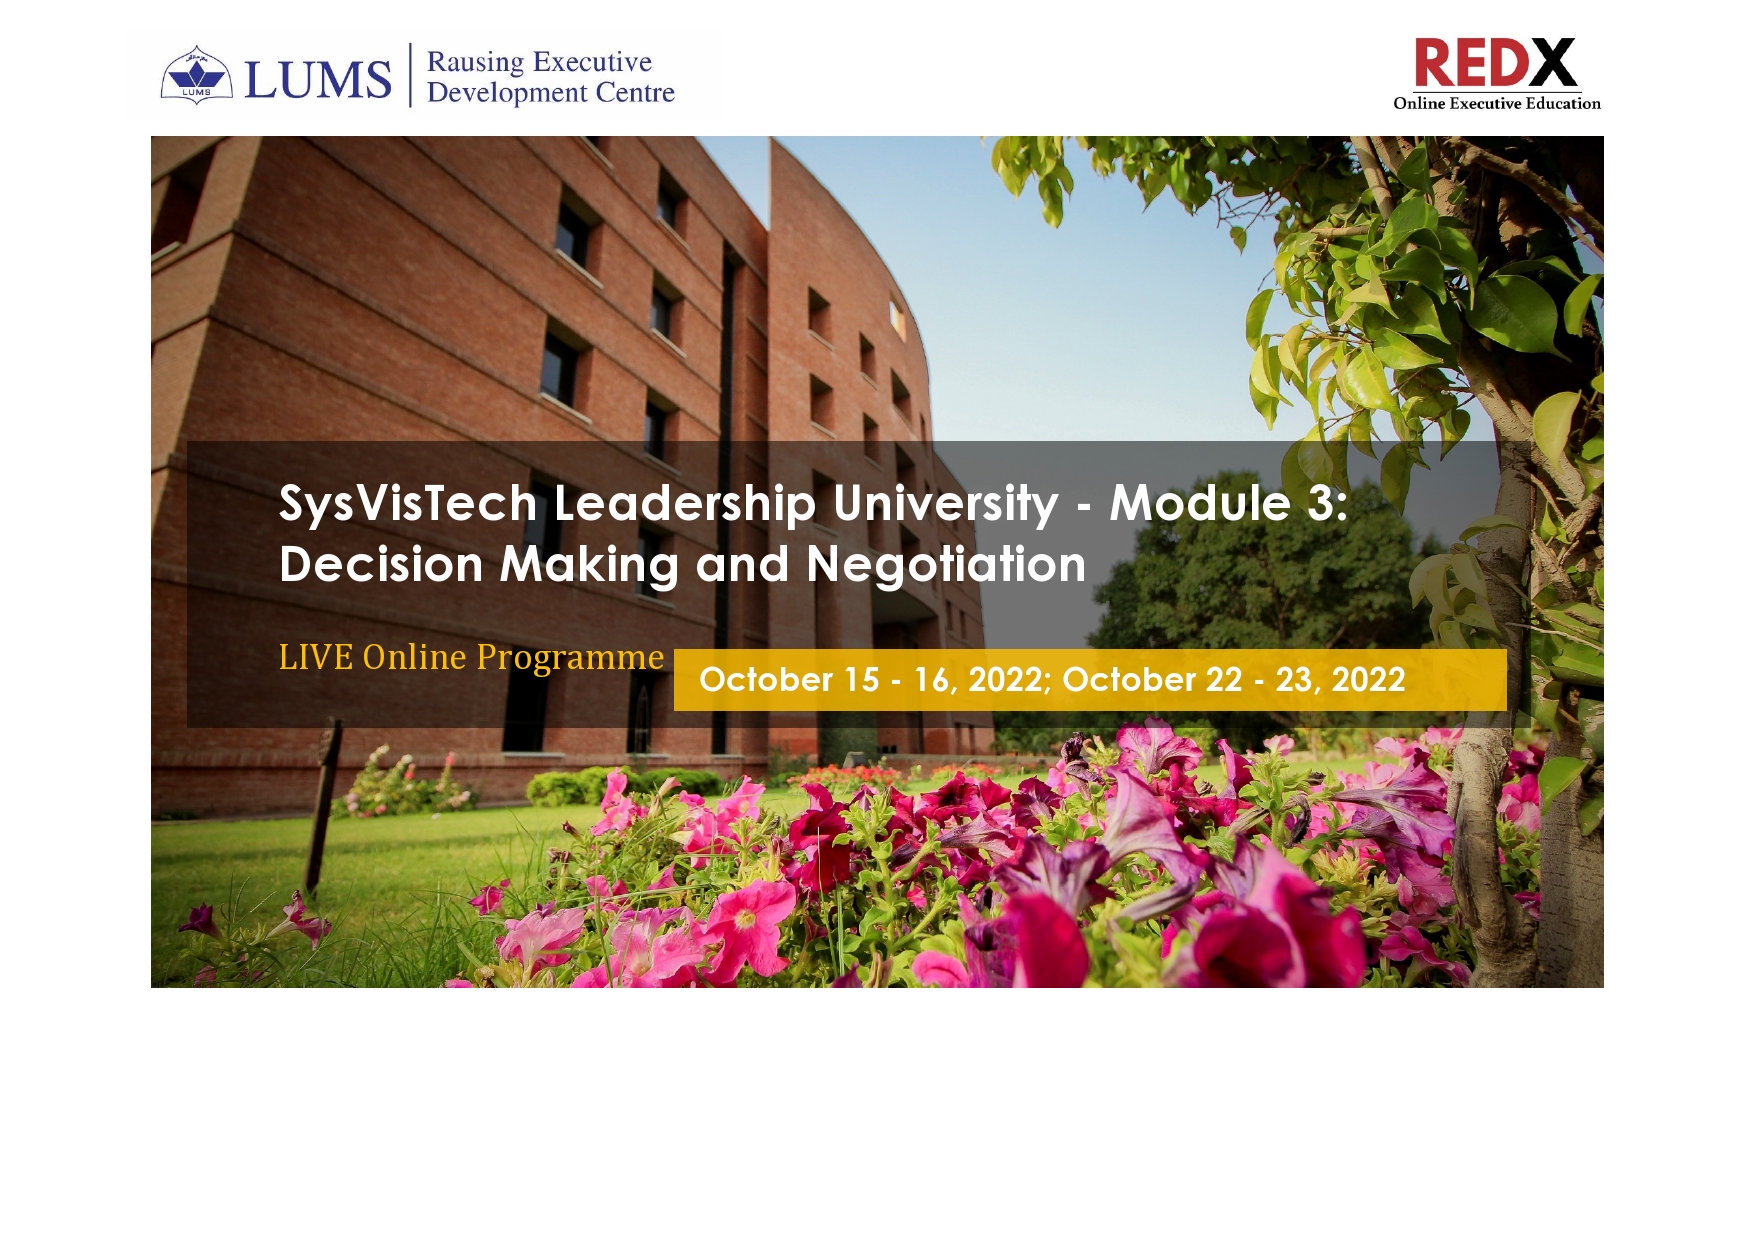 SysVisTech Leadership University - Module 3: Decision Making and Negotiation - Live Online (October 15 - 16, 2022; Saturday, Sunday) & (October 22 - 23, 2022; Saturday, Sunday)